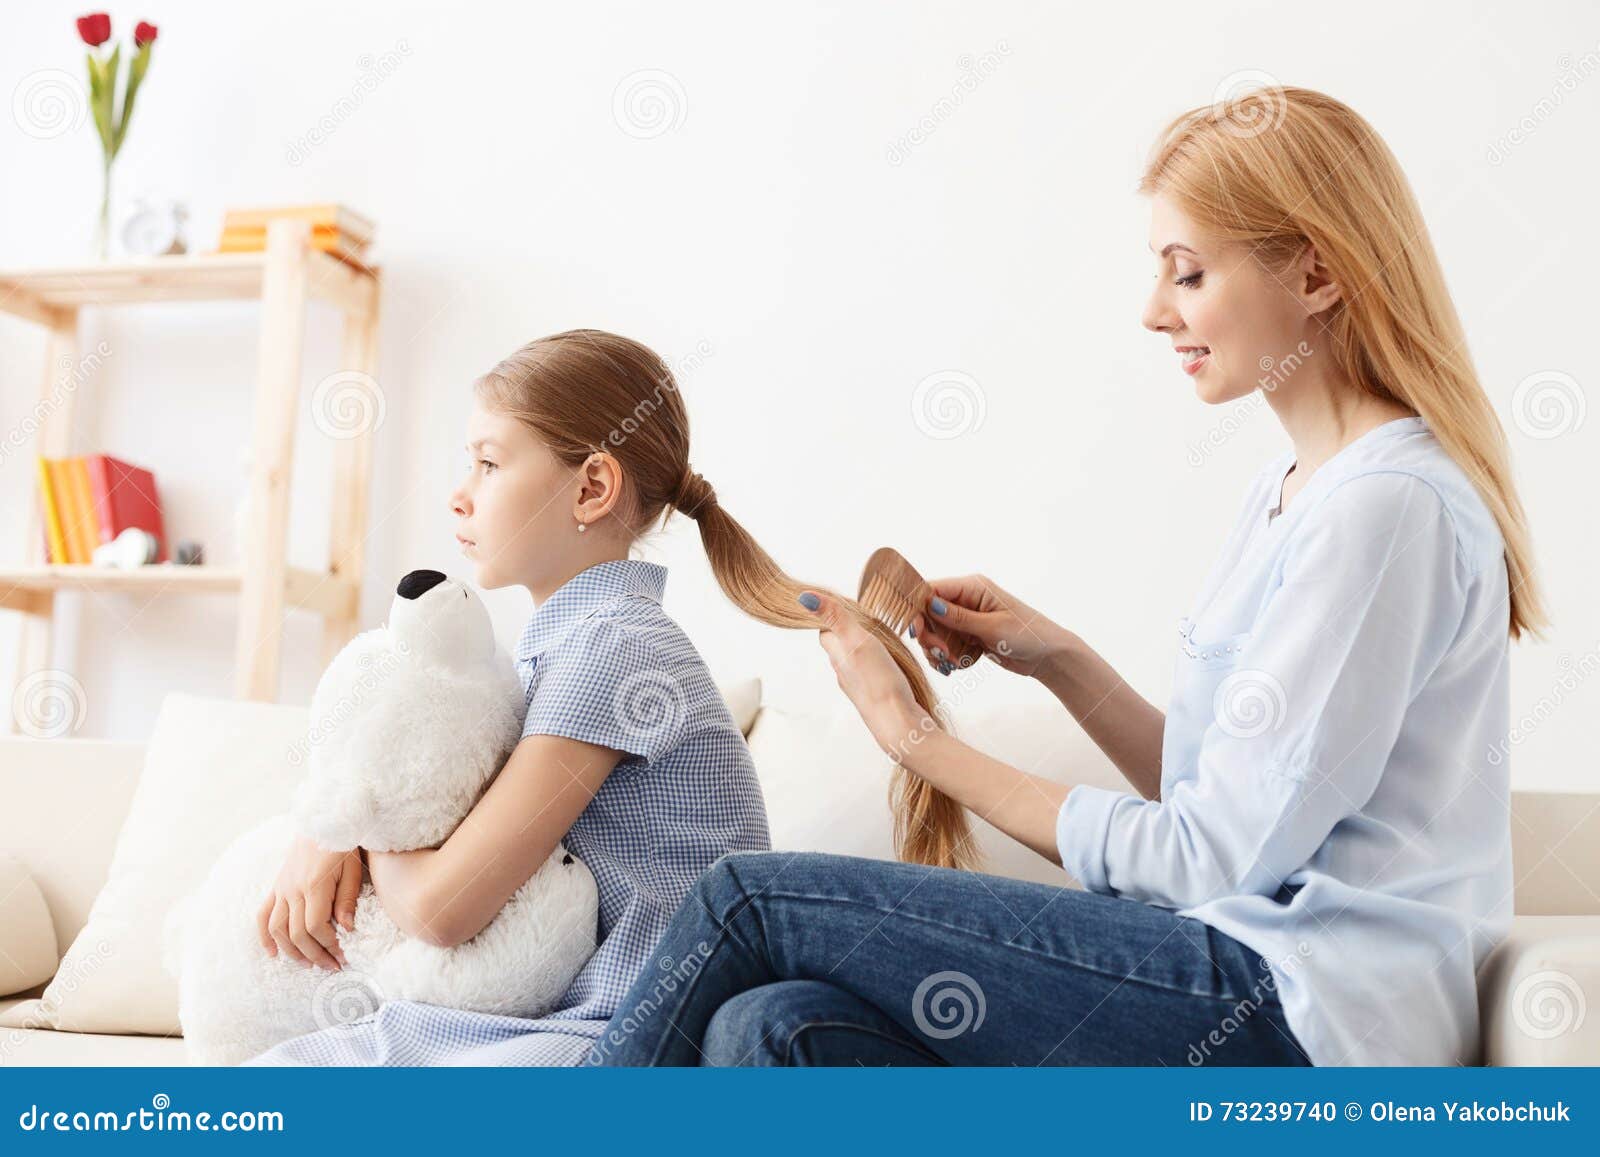 Mother Combing Hair of Daughter Stock Photo - Image of little, child:  73239740